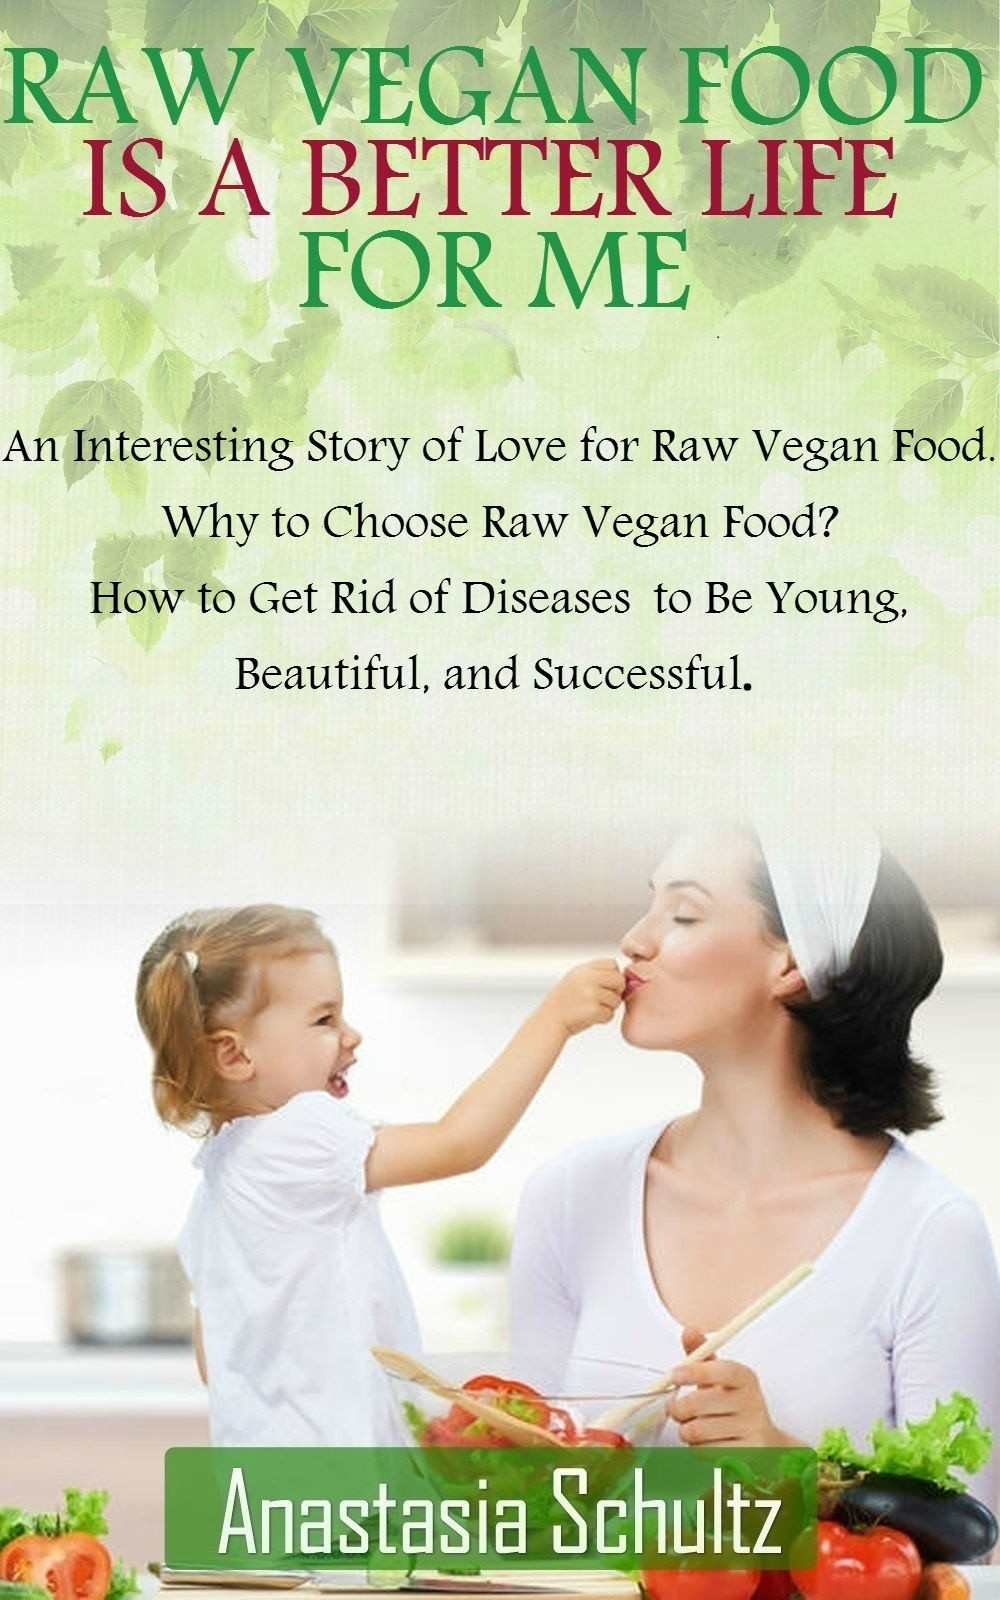 FREE: Raw Vegan Food Is A Better Life For Me by Anastasia Schultz